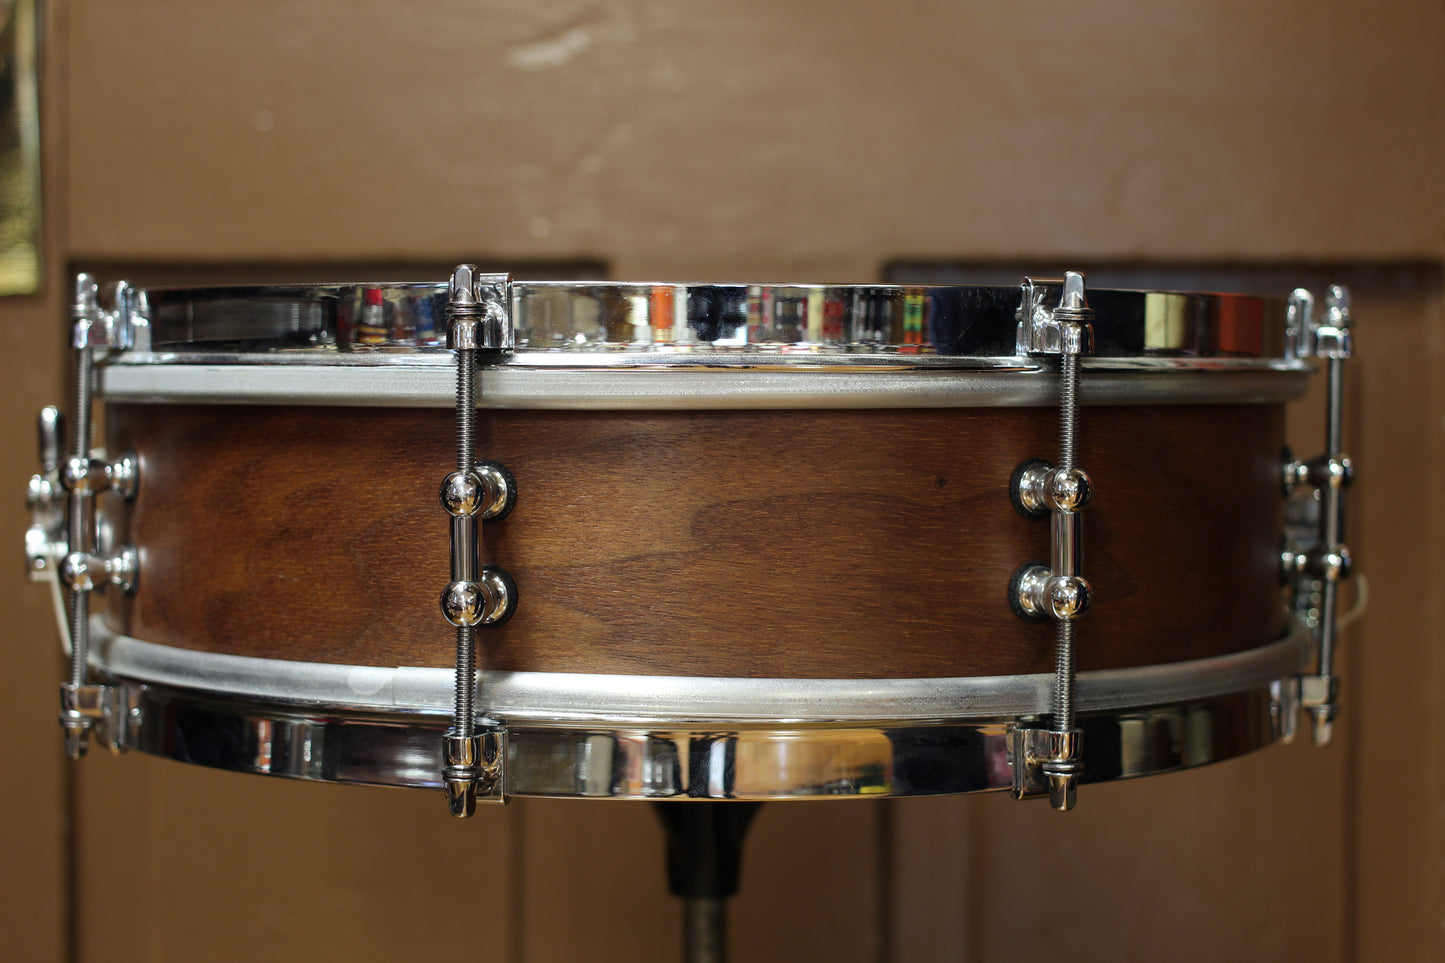 YC Drum Company 4"x14" Snare Drum in Natural Walnut